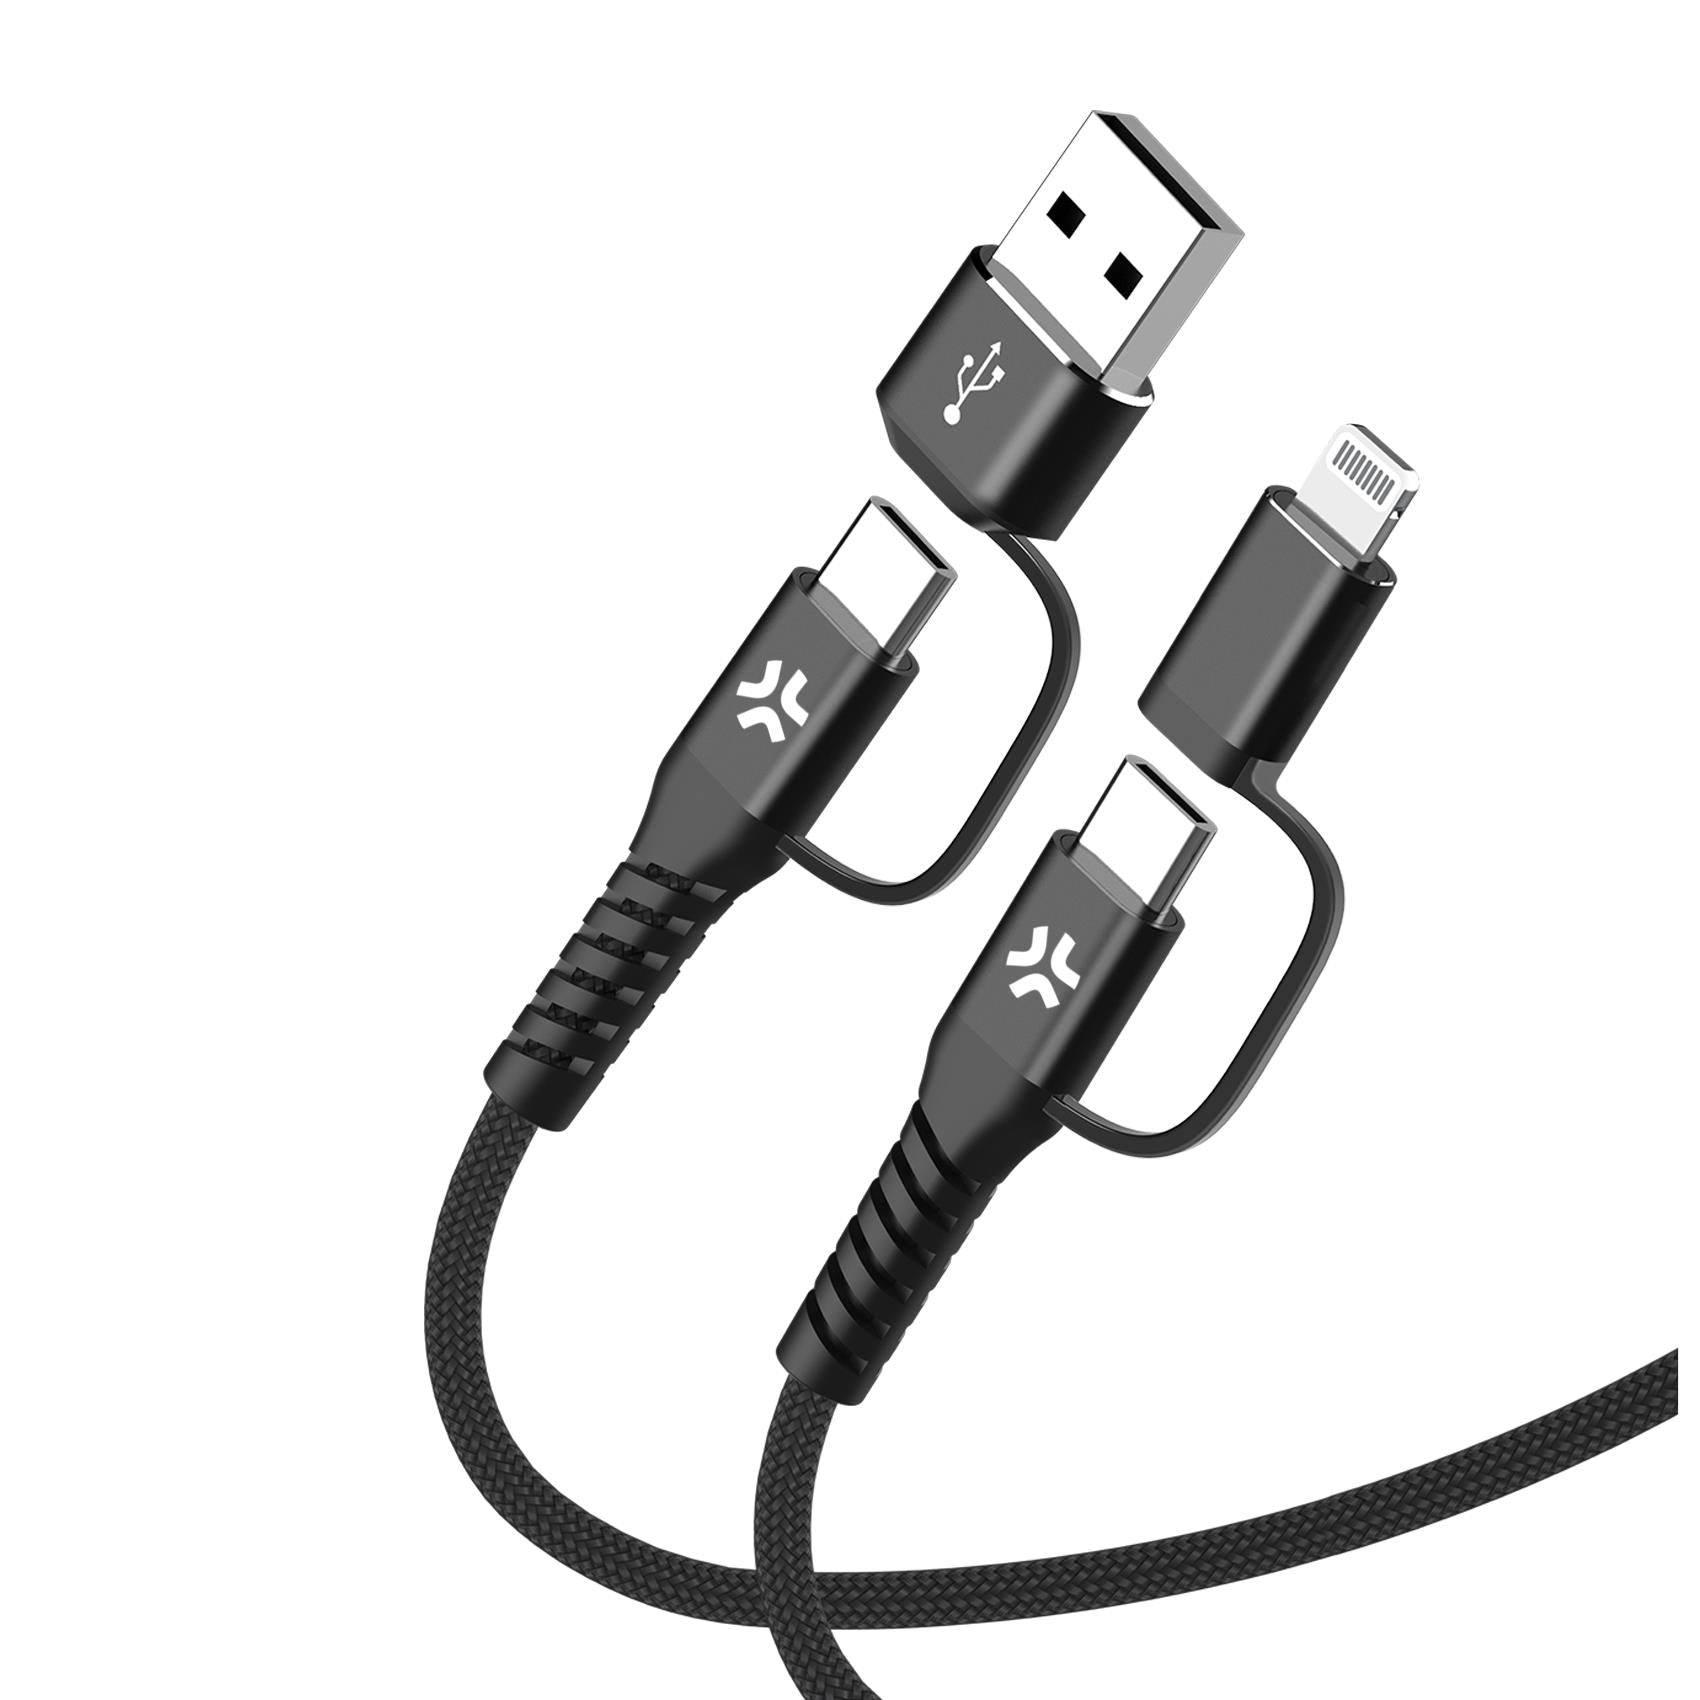 Celly 4IN1 Cable: USB-C to USB-C cabl with USB-A & Lightning adapters